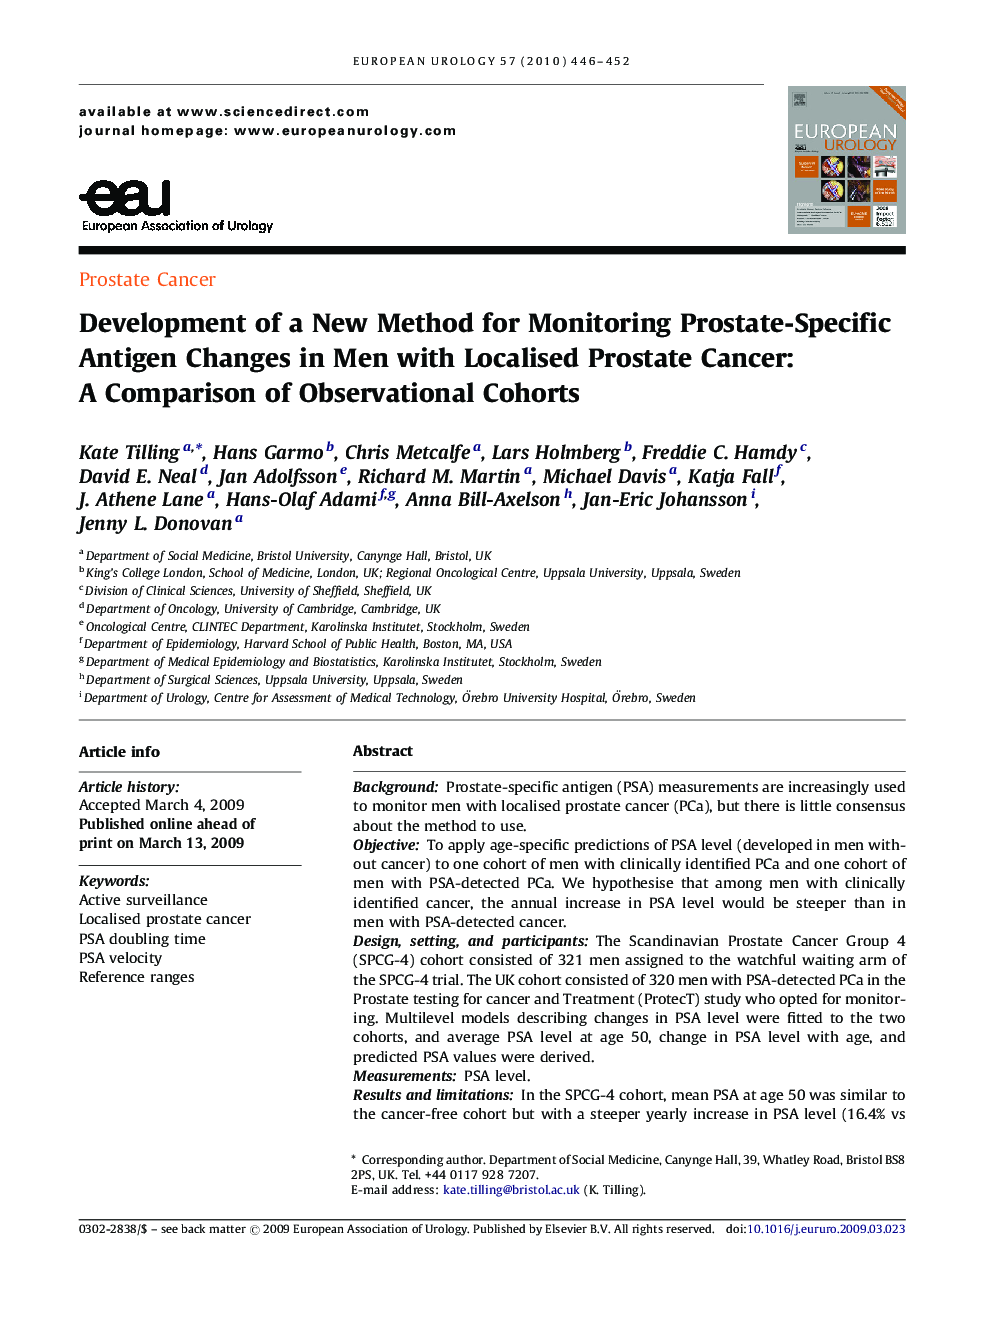 Development of a New Method for Monitoring Prostate-Specific Antigen Changes in Men with Localised Prostate Cancer: A Comparison of Observational Cohorts